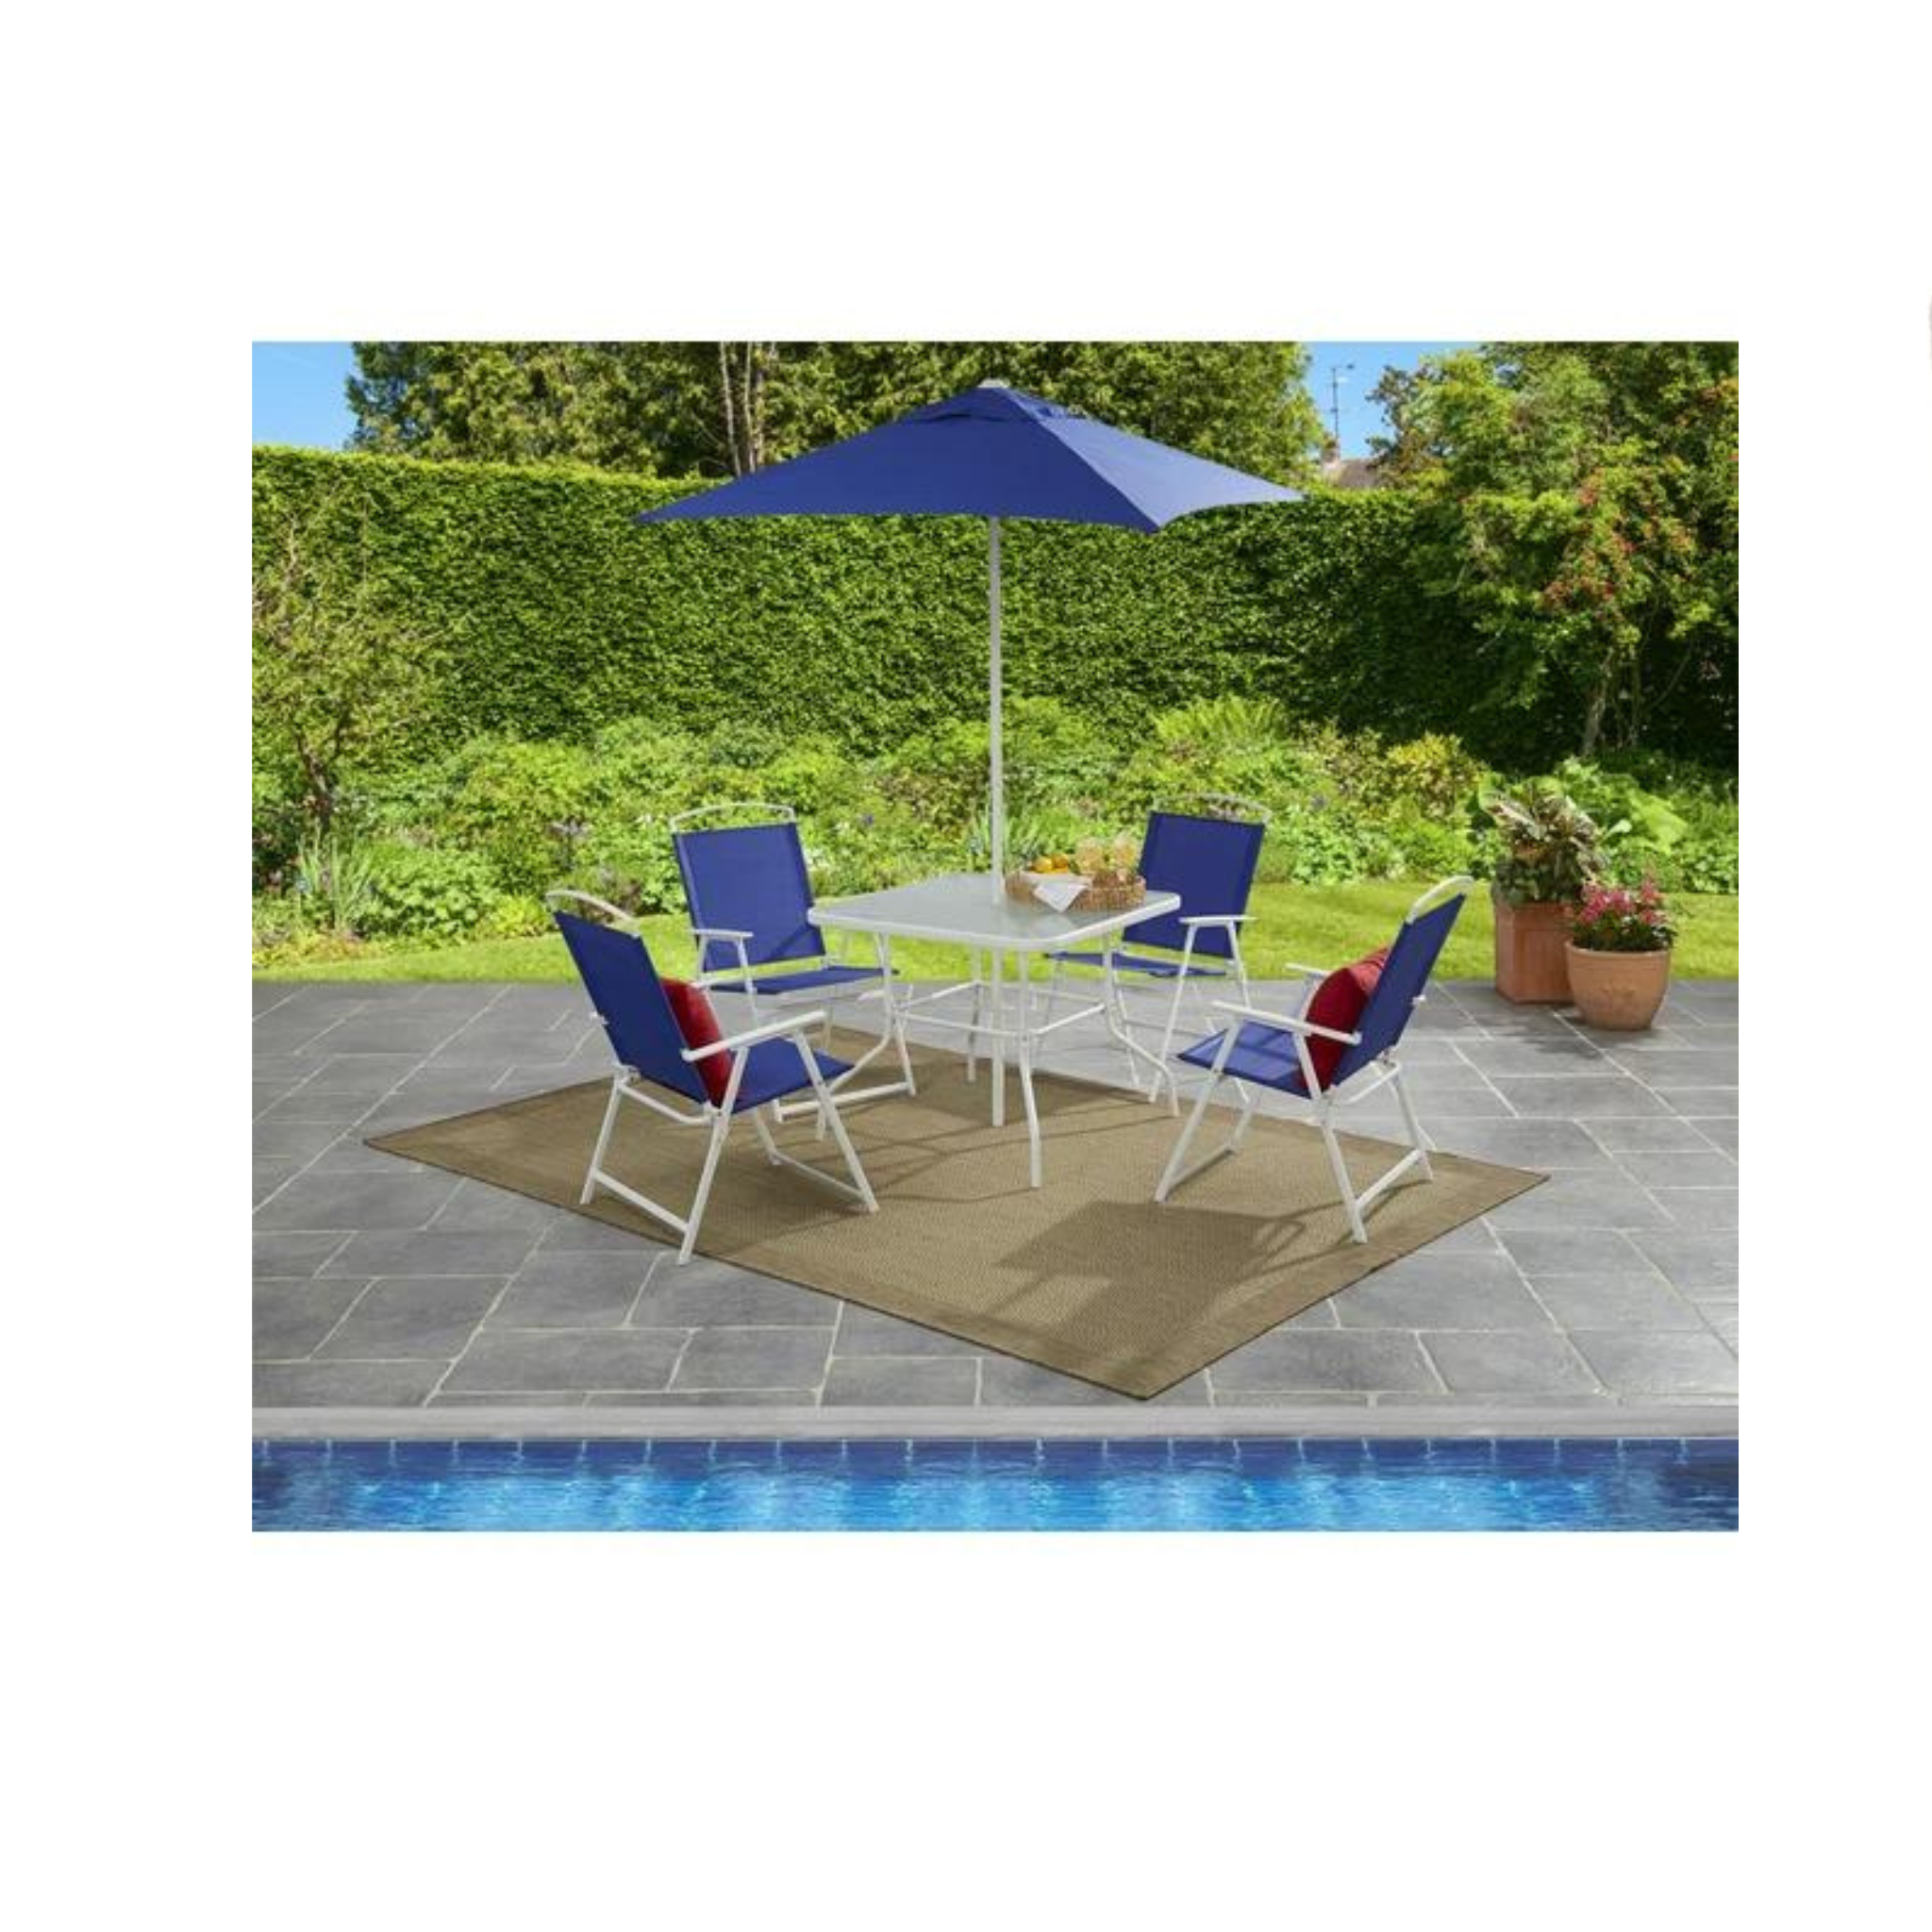 Mainstays Albany Lane 6 Piece Outdoor Patio Dining Set (4 Colors)